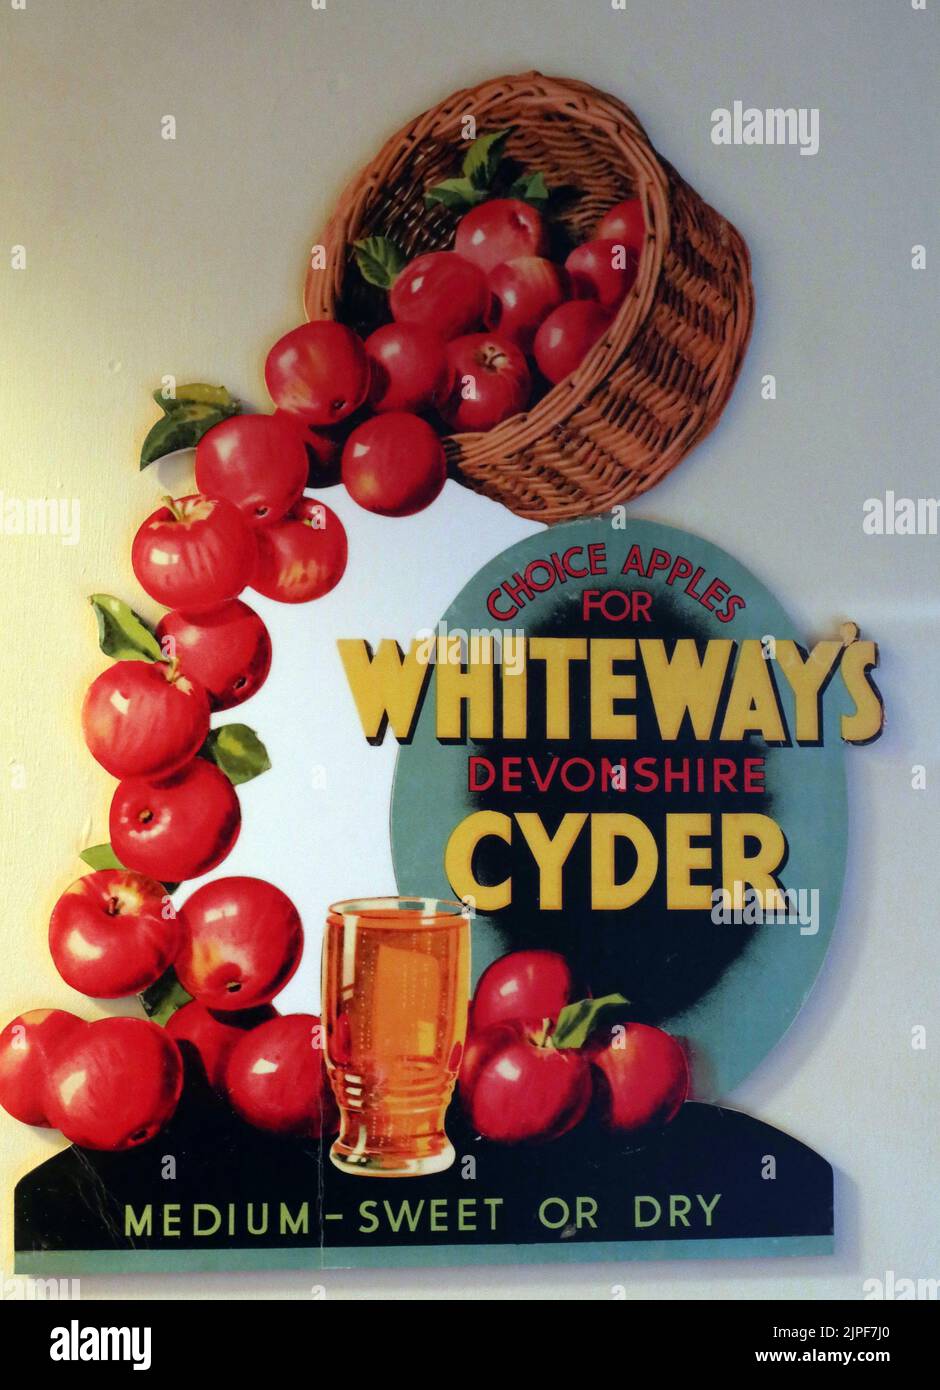 1950s Poster advert for Whiteways Devon cyder 'No More than Ordinary siders' - mele a scelta - medie dolci o secche Foto Stock